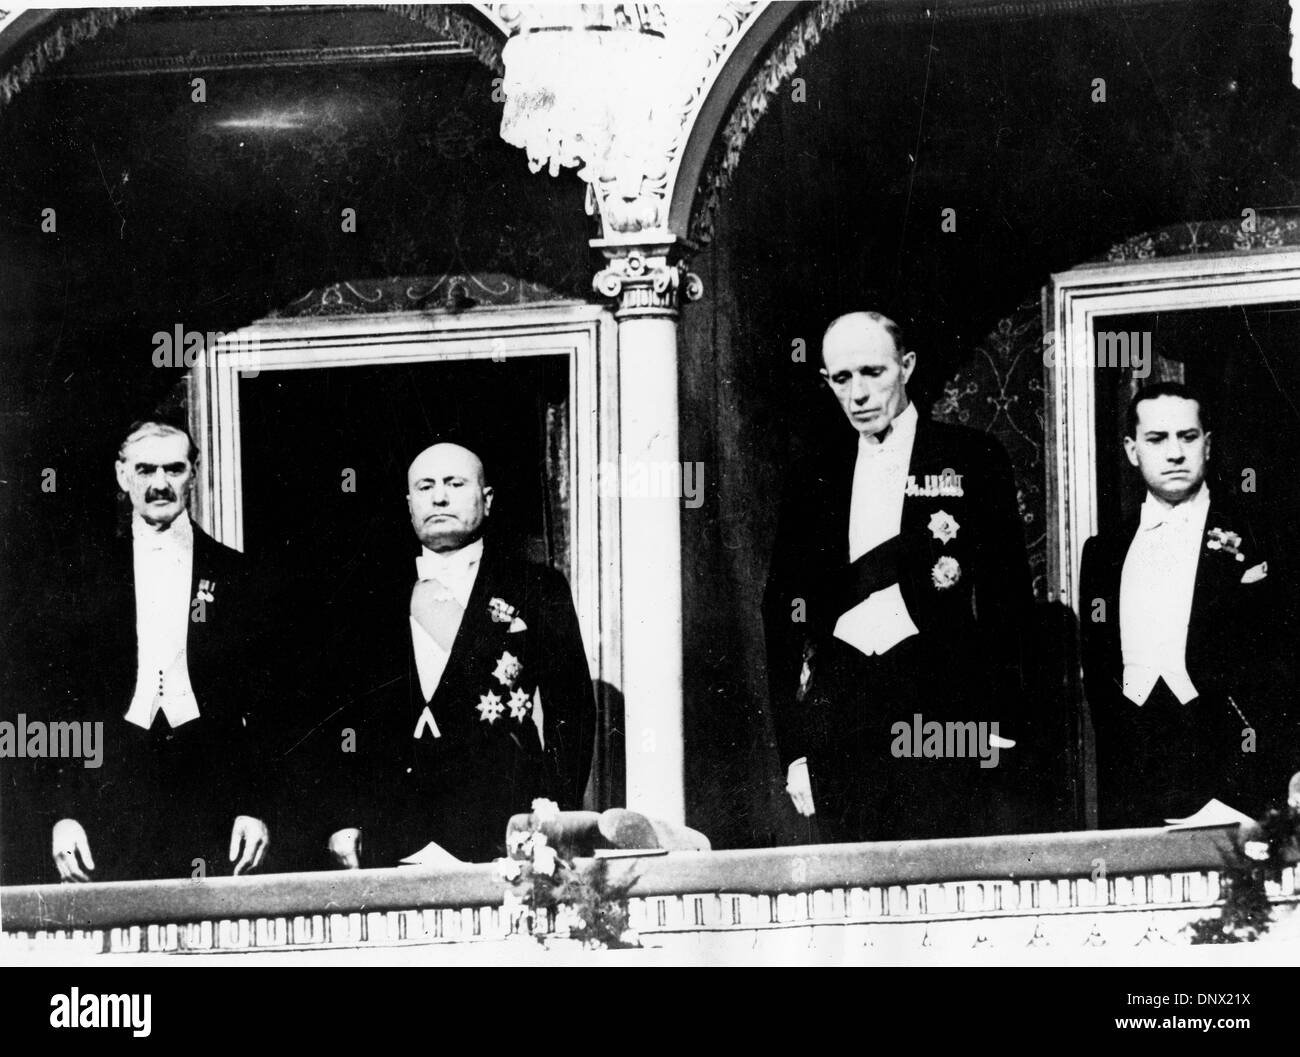 Jan. 14, 1939 - Rome, Italy - BENITO MUSSOLINI (1883-1945) the Italian dictator and leader of the Fascist movement, CHAMBERLAIN, HALIFAX, and COUNT CIANO at the Royal Opera House. (Credit Image: © KEYSTONE Pictures USA/ZUMAPRESS.com) Stock Photo